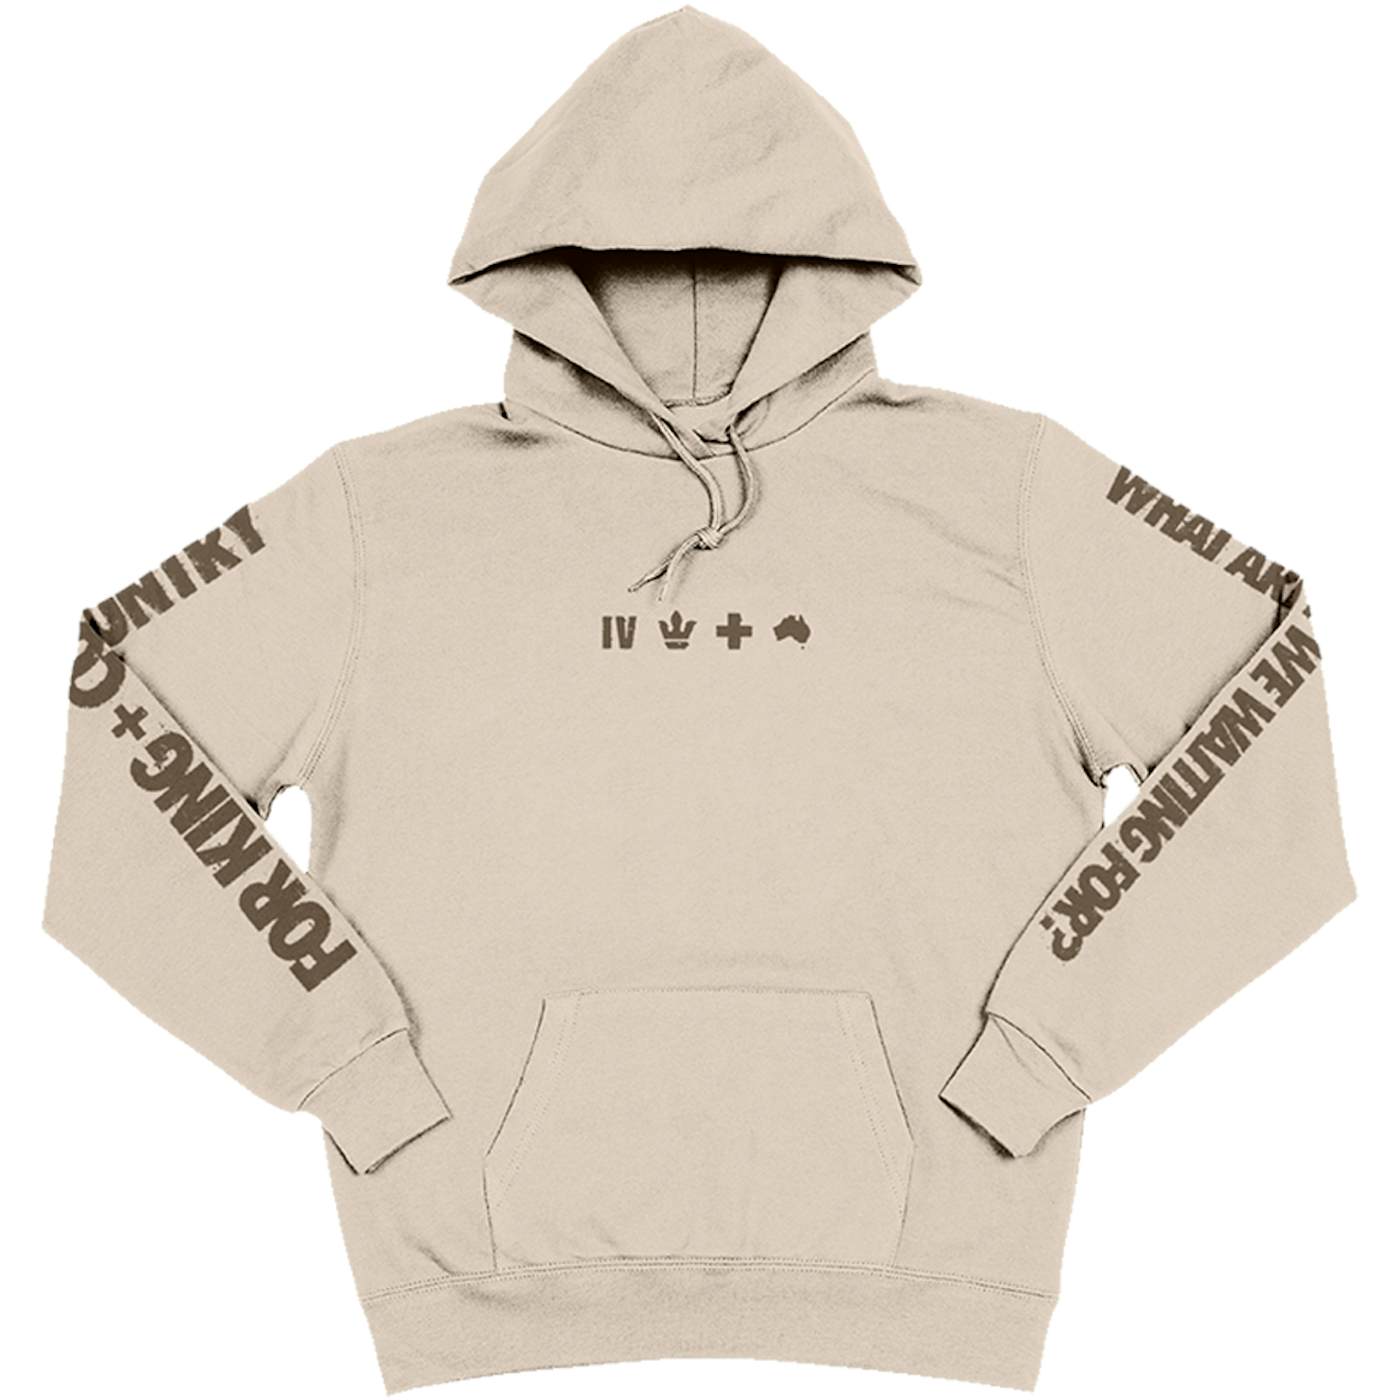 for KING & COUNTRY Collector's Sweatshirt - Tan